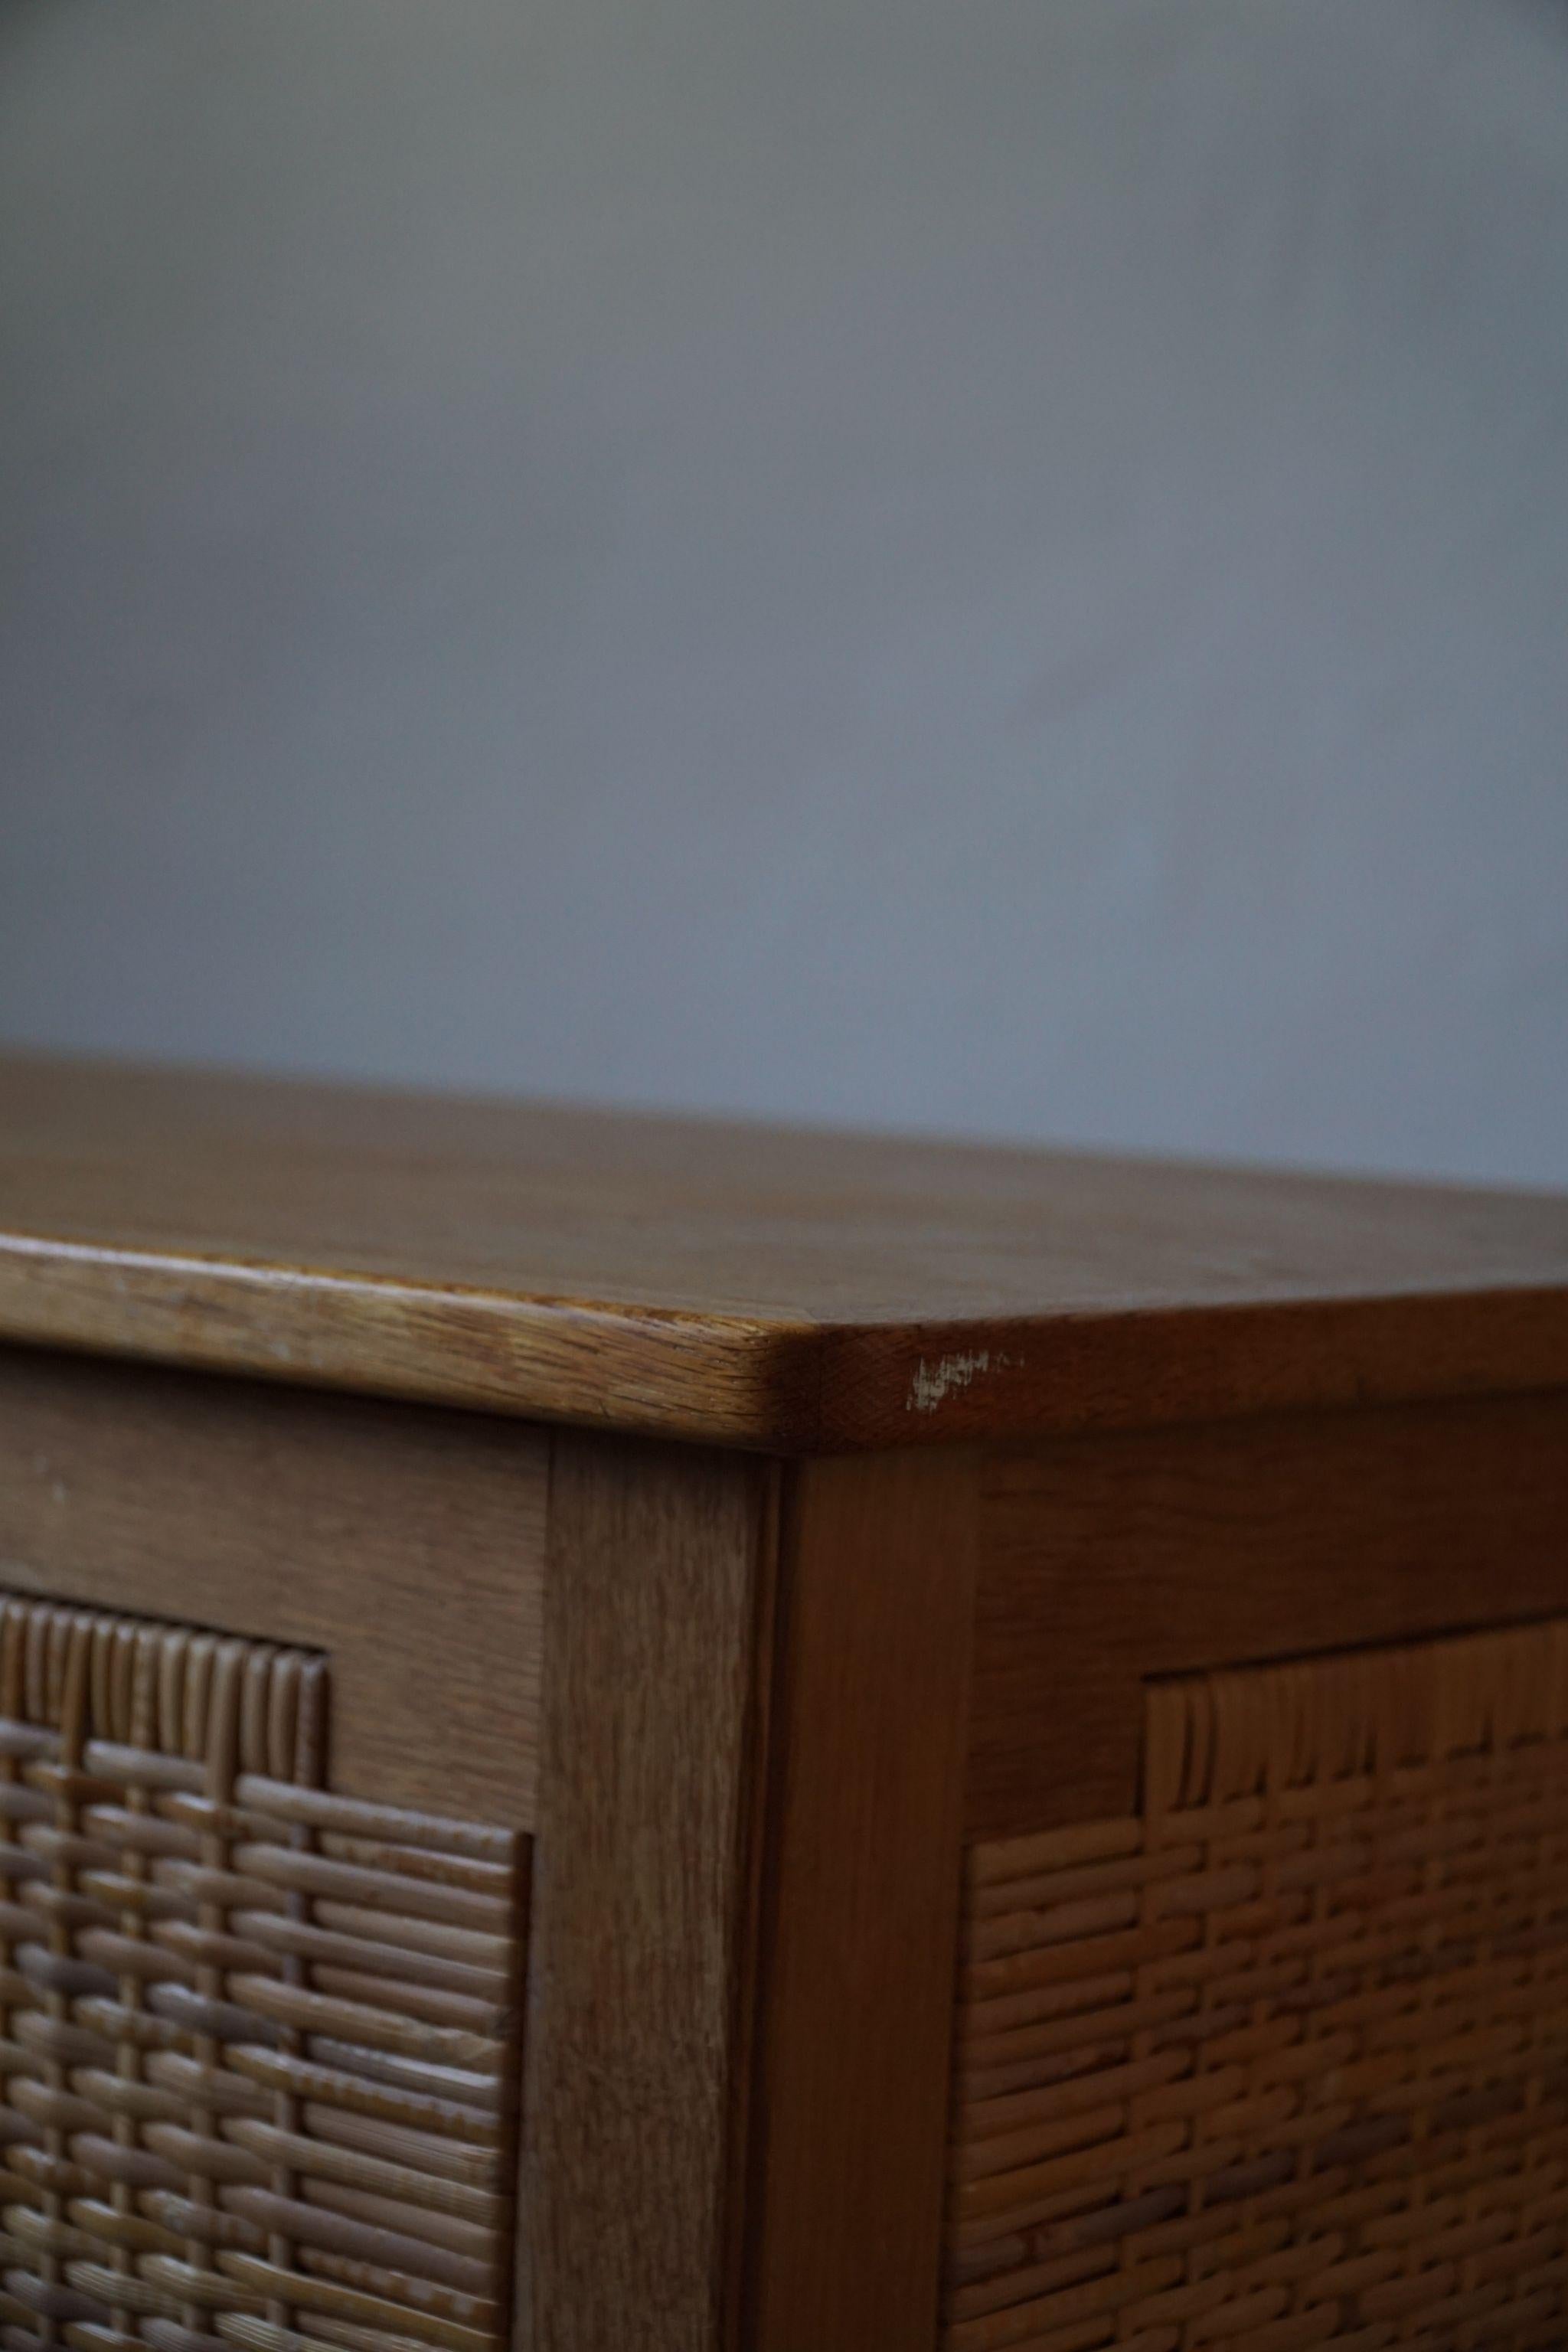 Kai Winding Chest / Bench in Cane & Oak, Made for Poul Hundevad, 